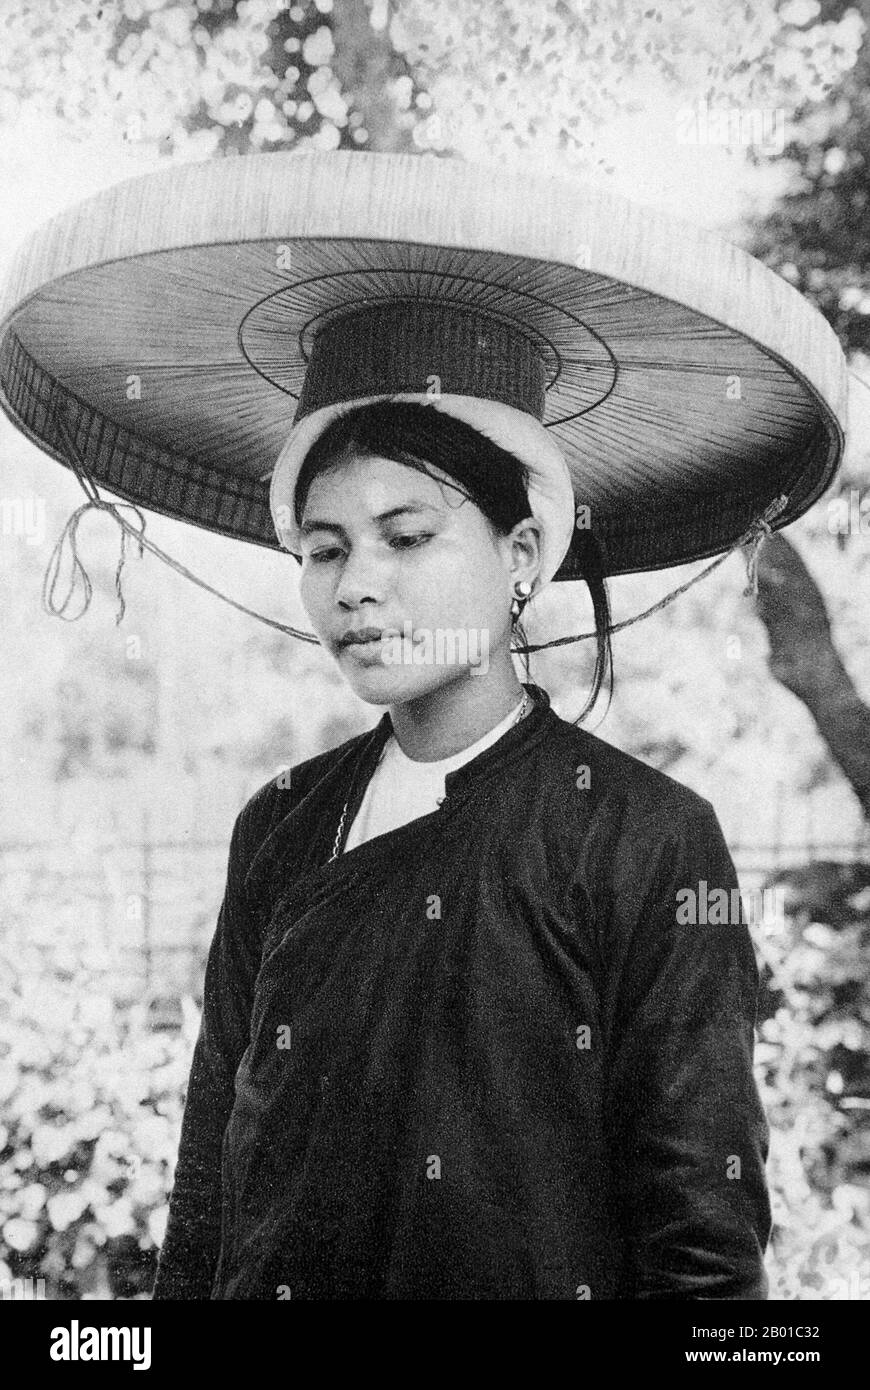 A woman of Tonkin, with a cartwheel hat (known as a Non Quai Thao or 'coarse silk strap hat'), Cho Bo town, c. 1920.  Tonkin (Bắc Kỳ in Vietnamese), sometimes spelled Tongkin, Tonquin or Tongking, is the northernmost part of Vietnam, south of China's Yunnan and Guangxi Provinces, east of northern Laos, and west of the Gulf of Tonkin. Locally, it is known as Bắc Kỳ, meaning 'Northern Region'. The name Tonkin comes from the Chinese meaning 'Eastern Capital'. Stock Photo